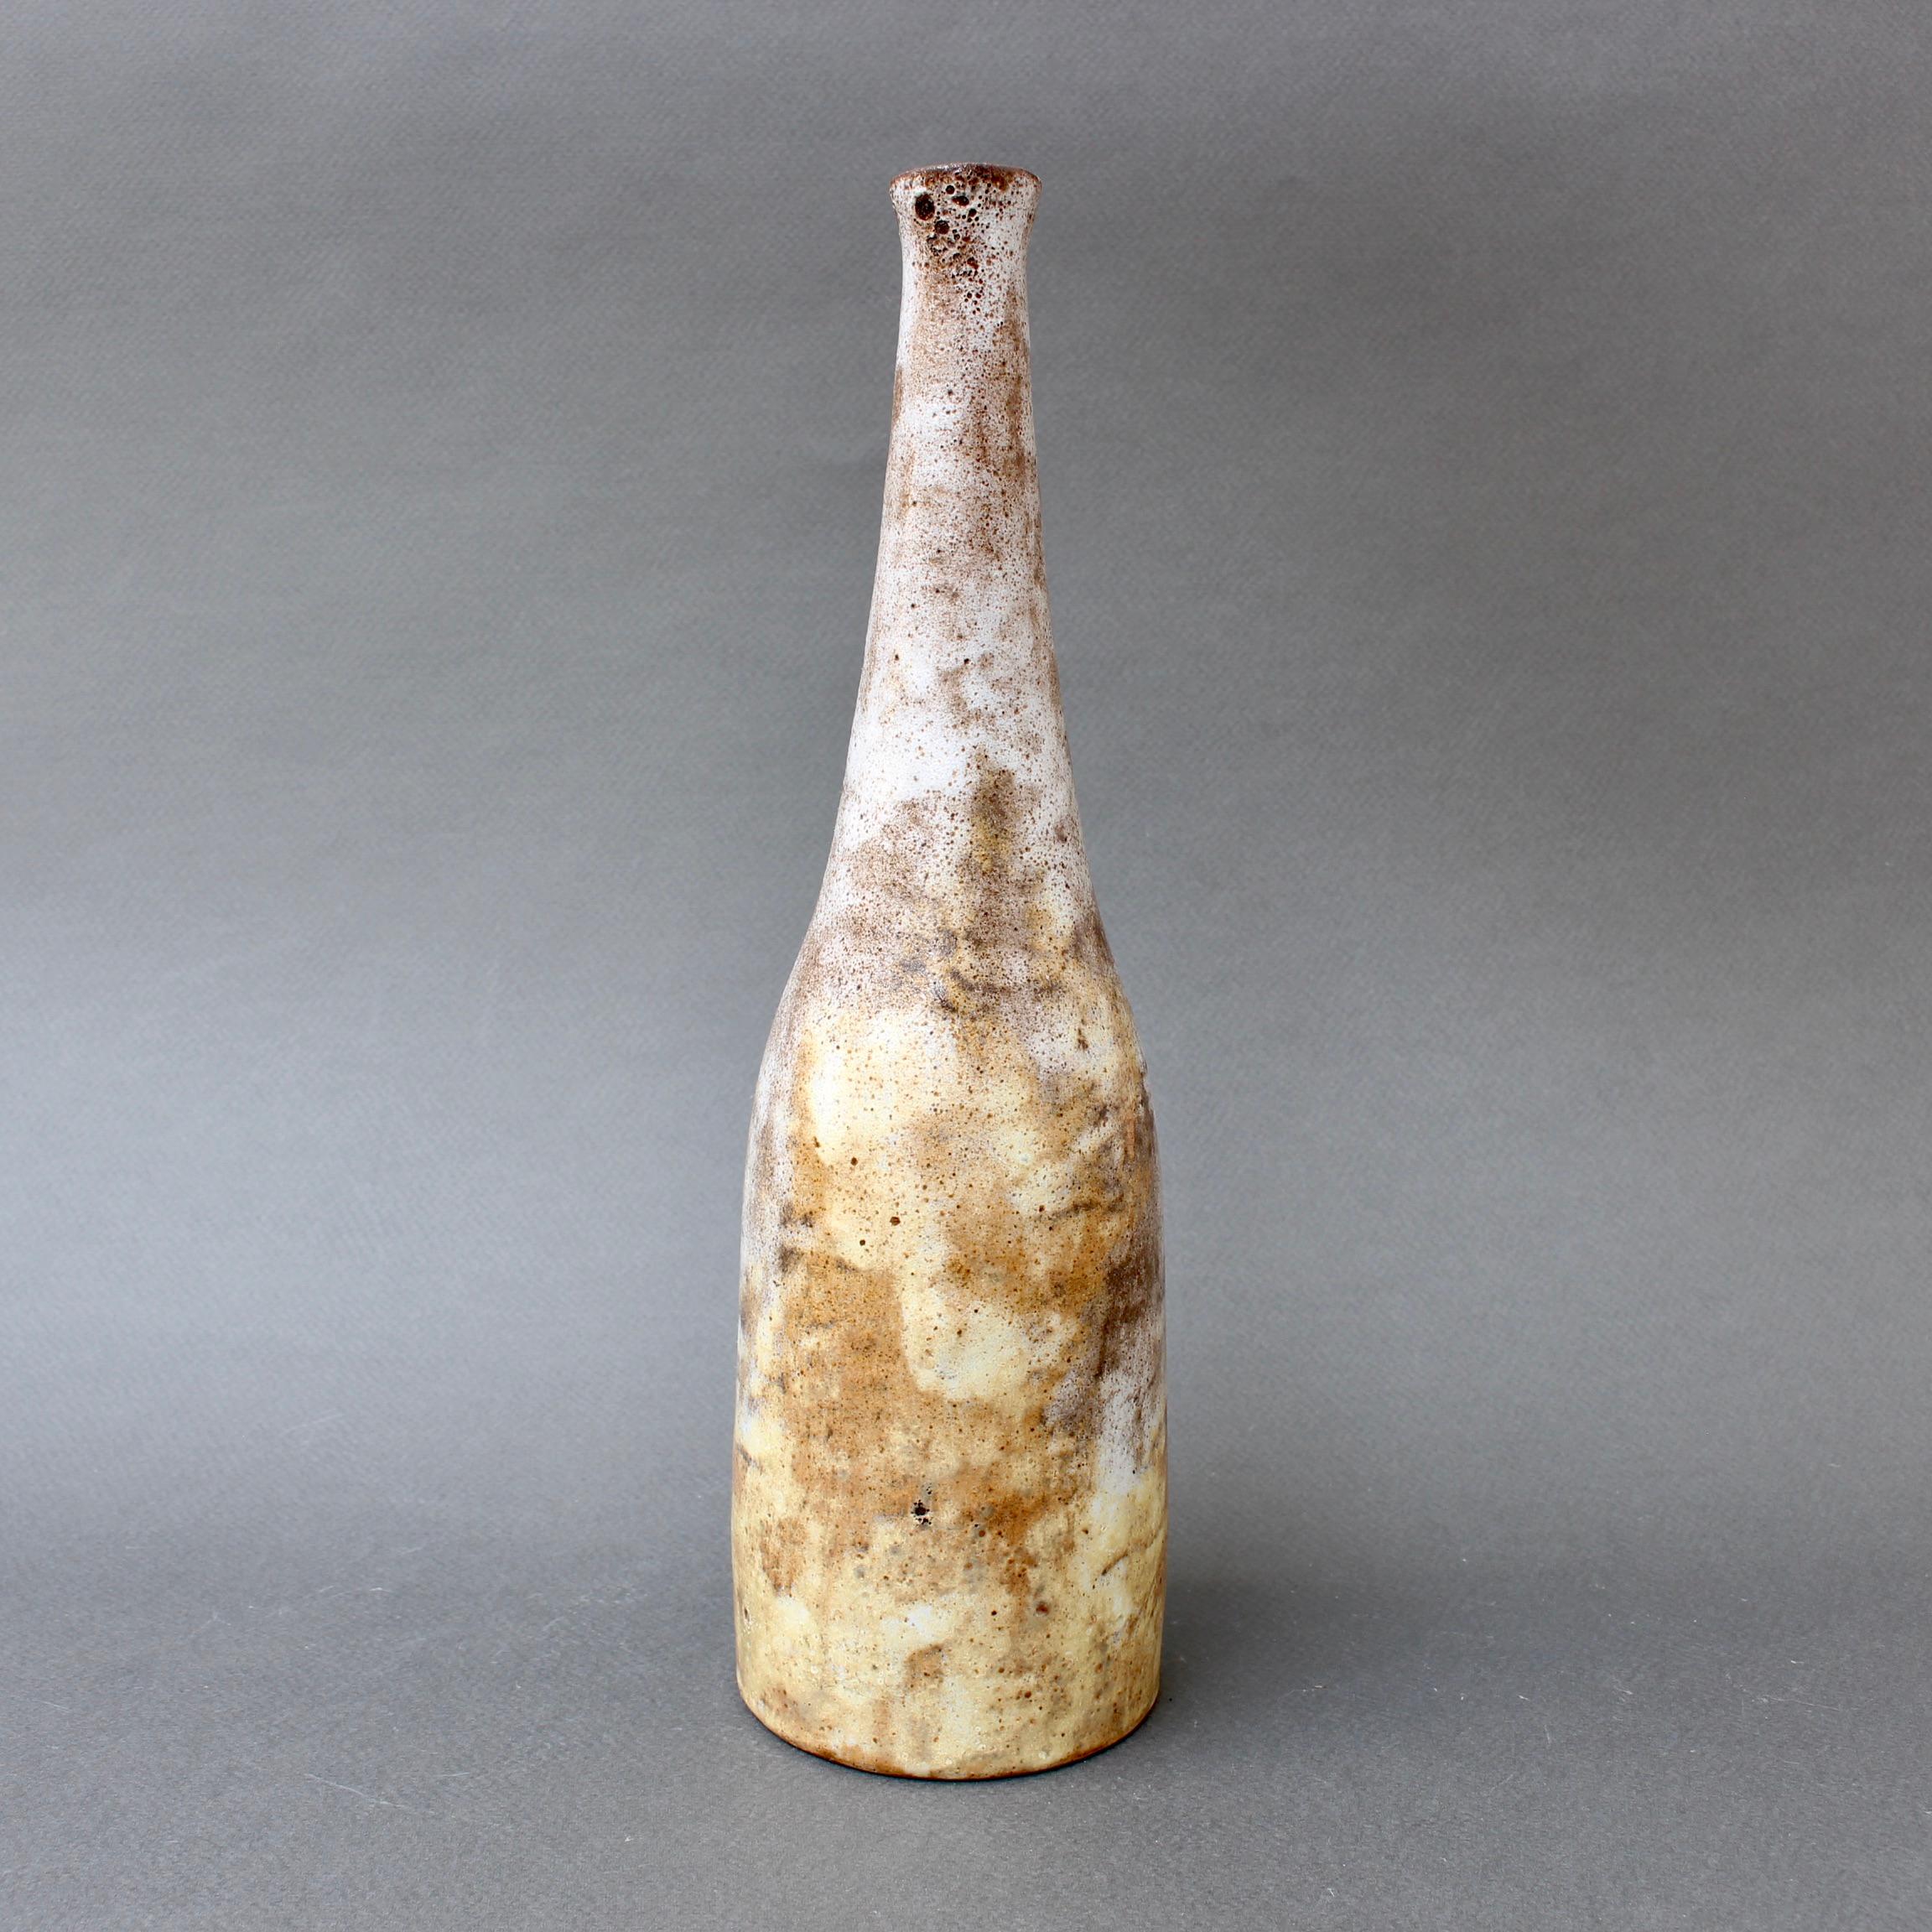 A Mid-Century ceramic bottle / vase by Alexandre Kostanda (circa 1960s). This stunning asymmetric earthenware vessel presents a misty appearance with earth tones in brown, beige and delicate yellows. Tactile and visually alluring, Kostanda's pieces